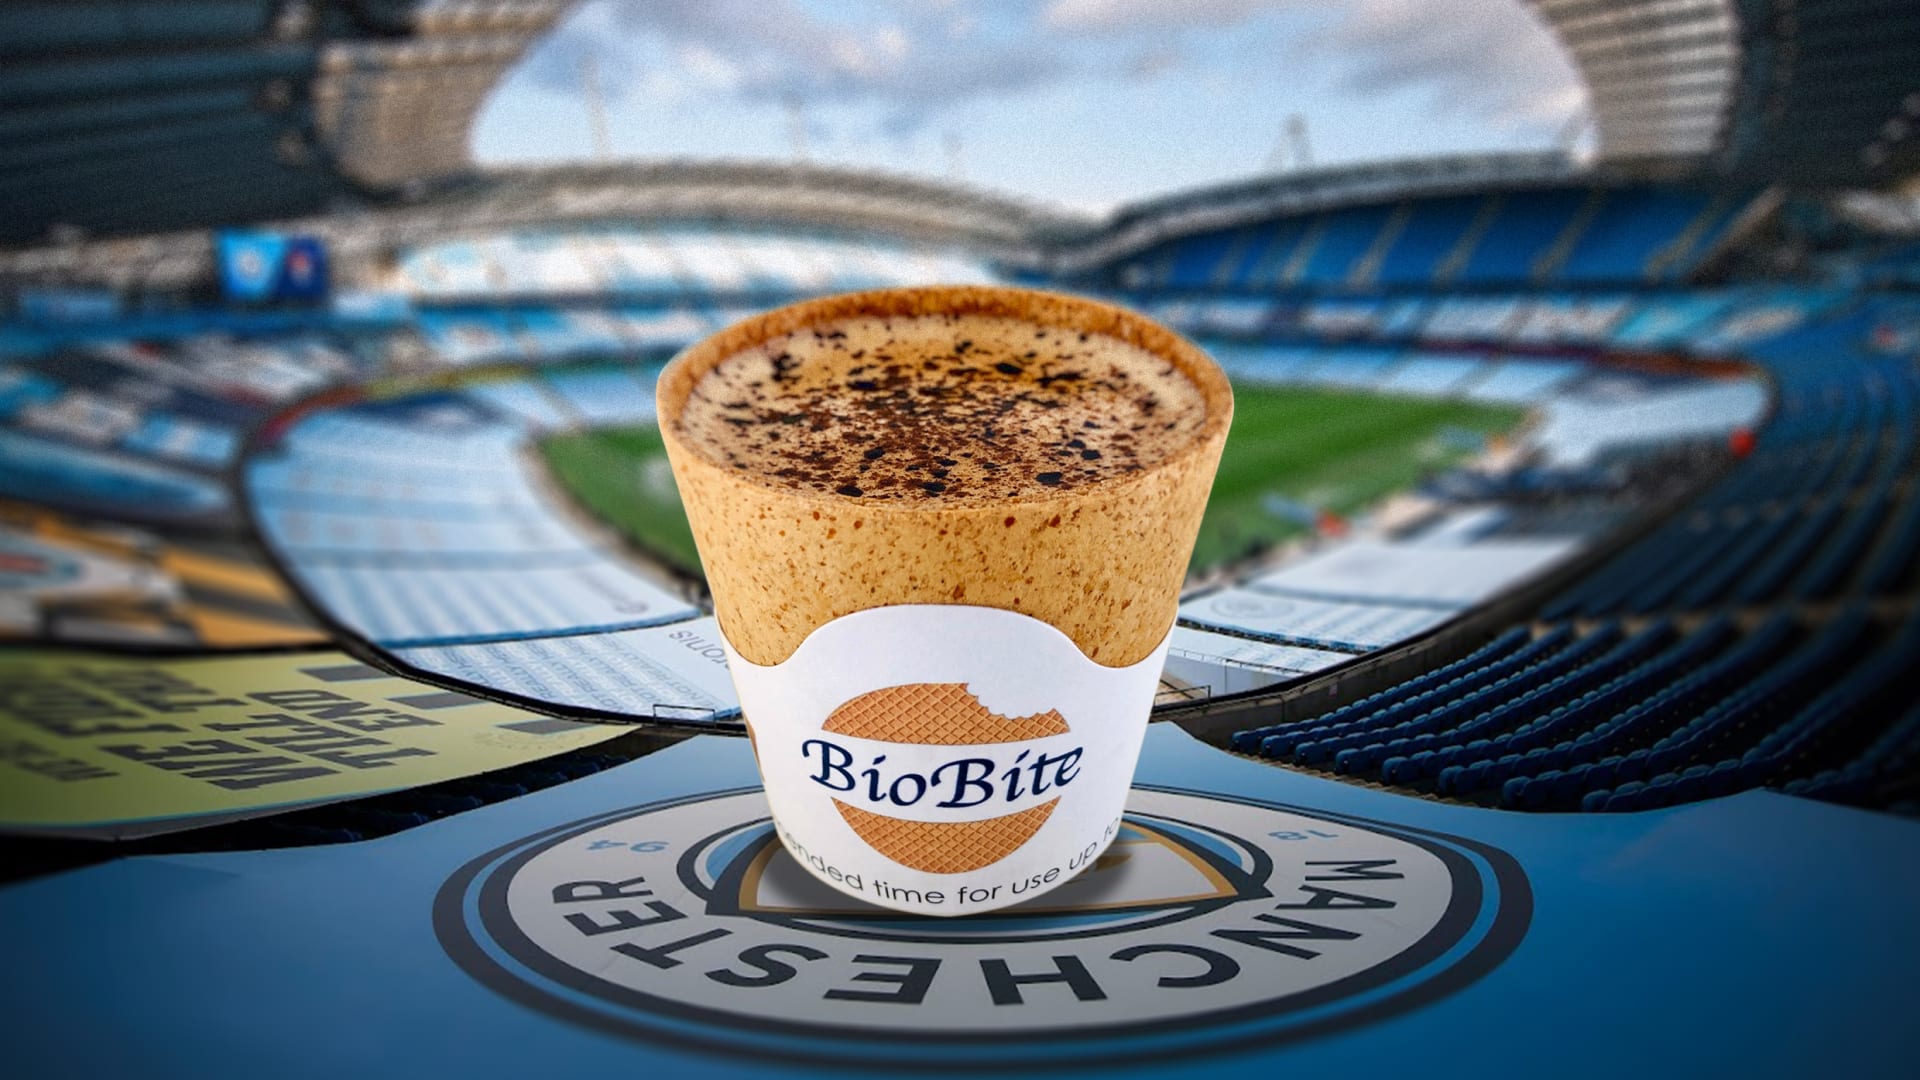 Soccer fans can now eat their coffee cups